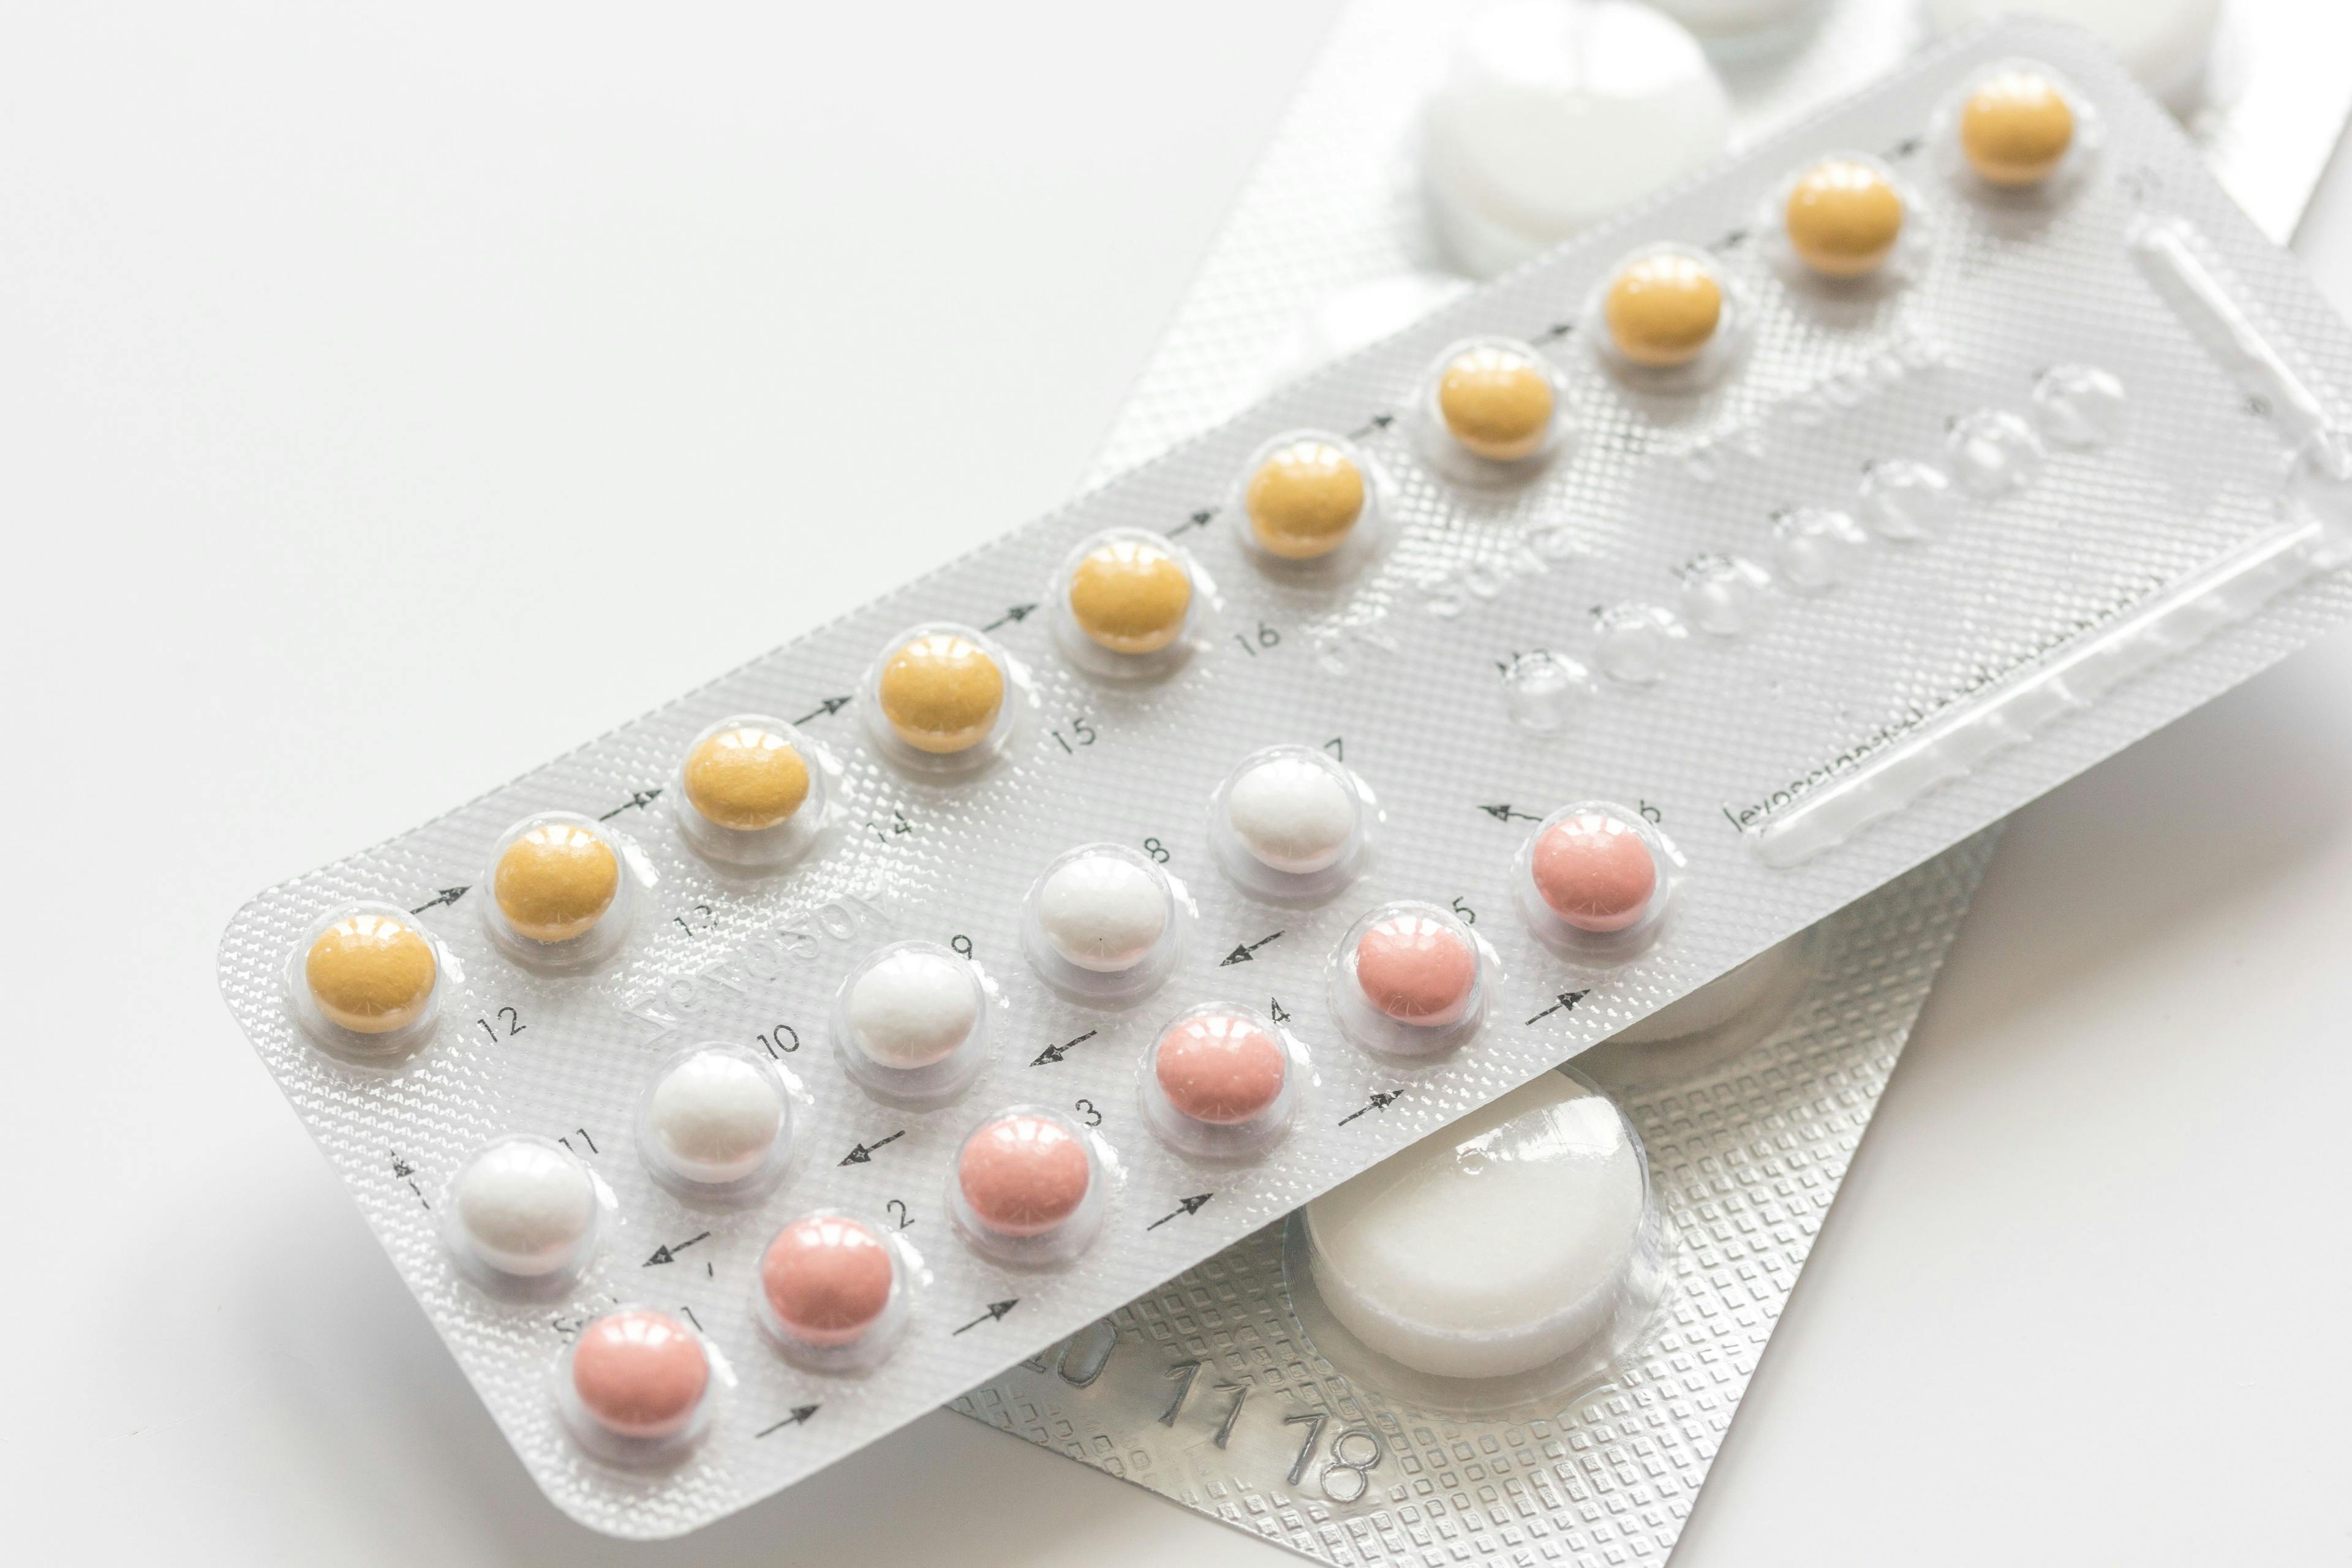 Combined contraceptive pills may reduce risk of diabetes in PCOS